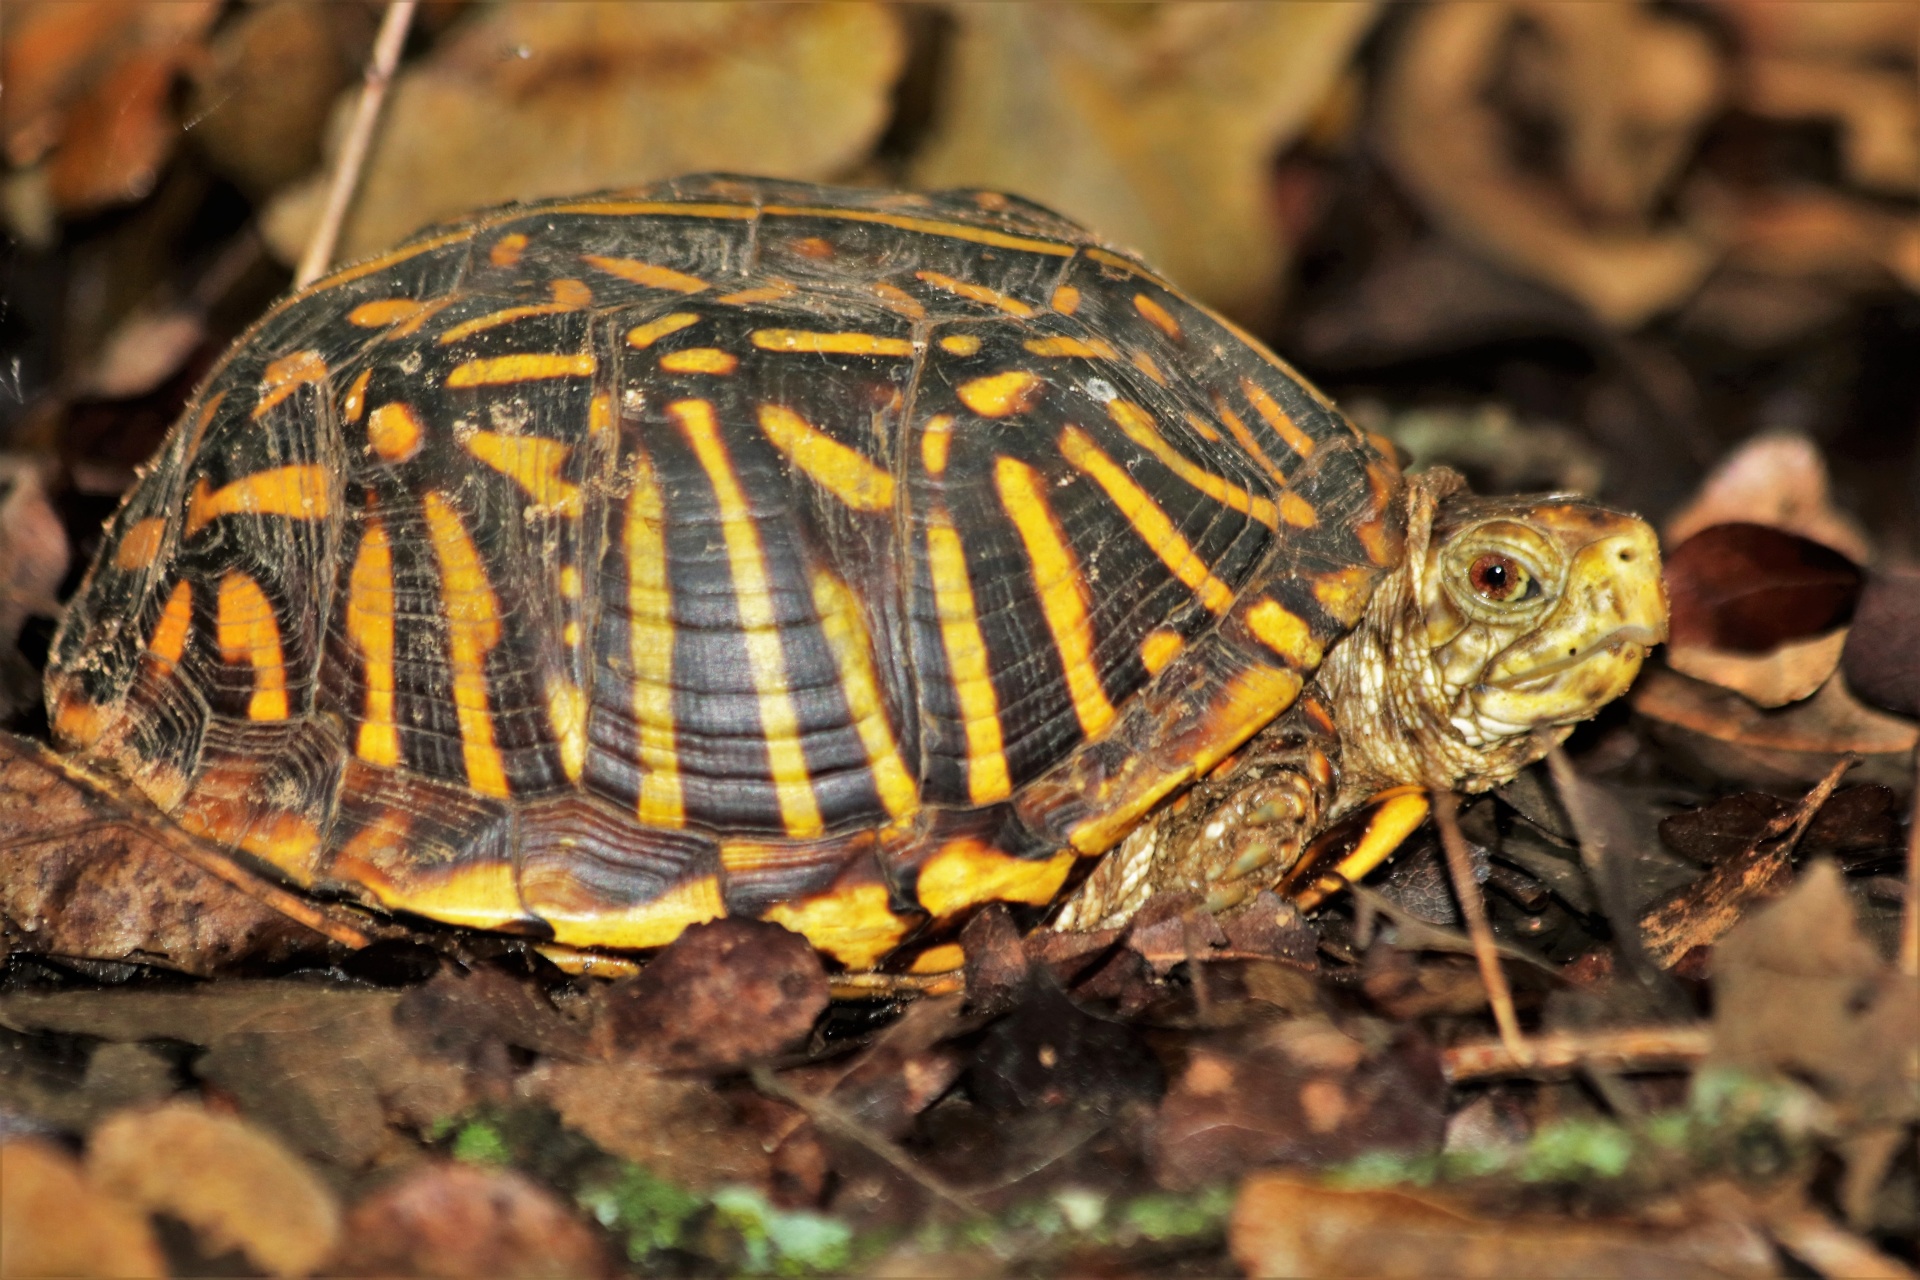 Close-up of a brown and yellow ornate box turtle walking among brown autumn leaves on the ground as he looks towards the camera.